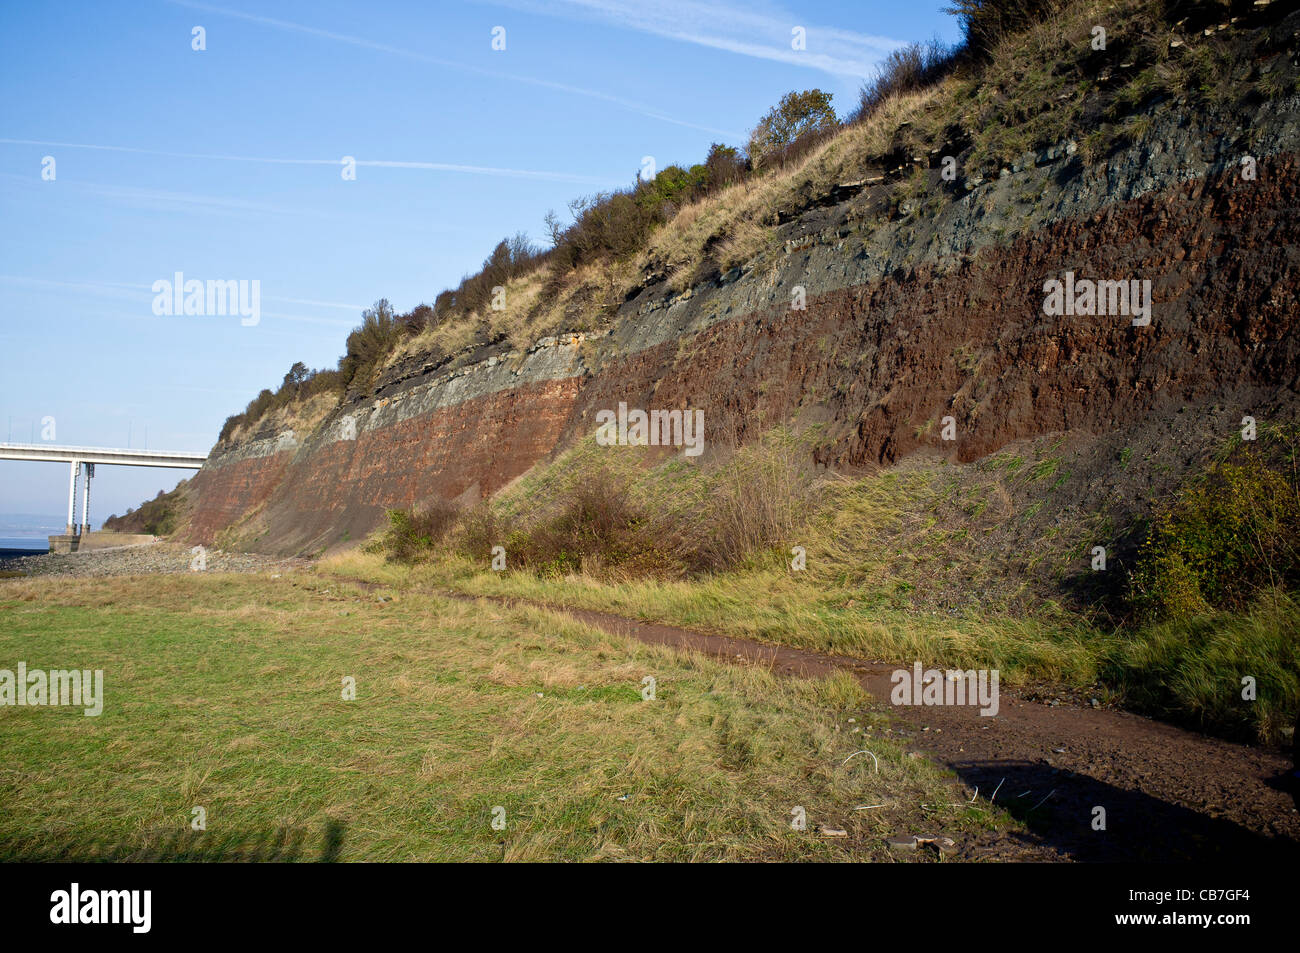 Red and green mudstone, shales and limestone at the SSSI site Aust Cliff, with the old Severn bridge in the background. Stock Photo